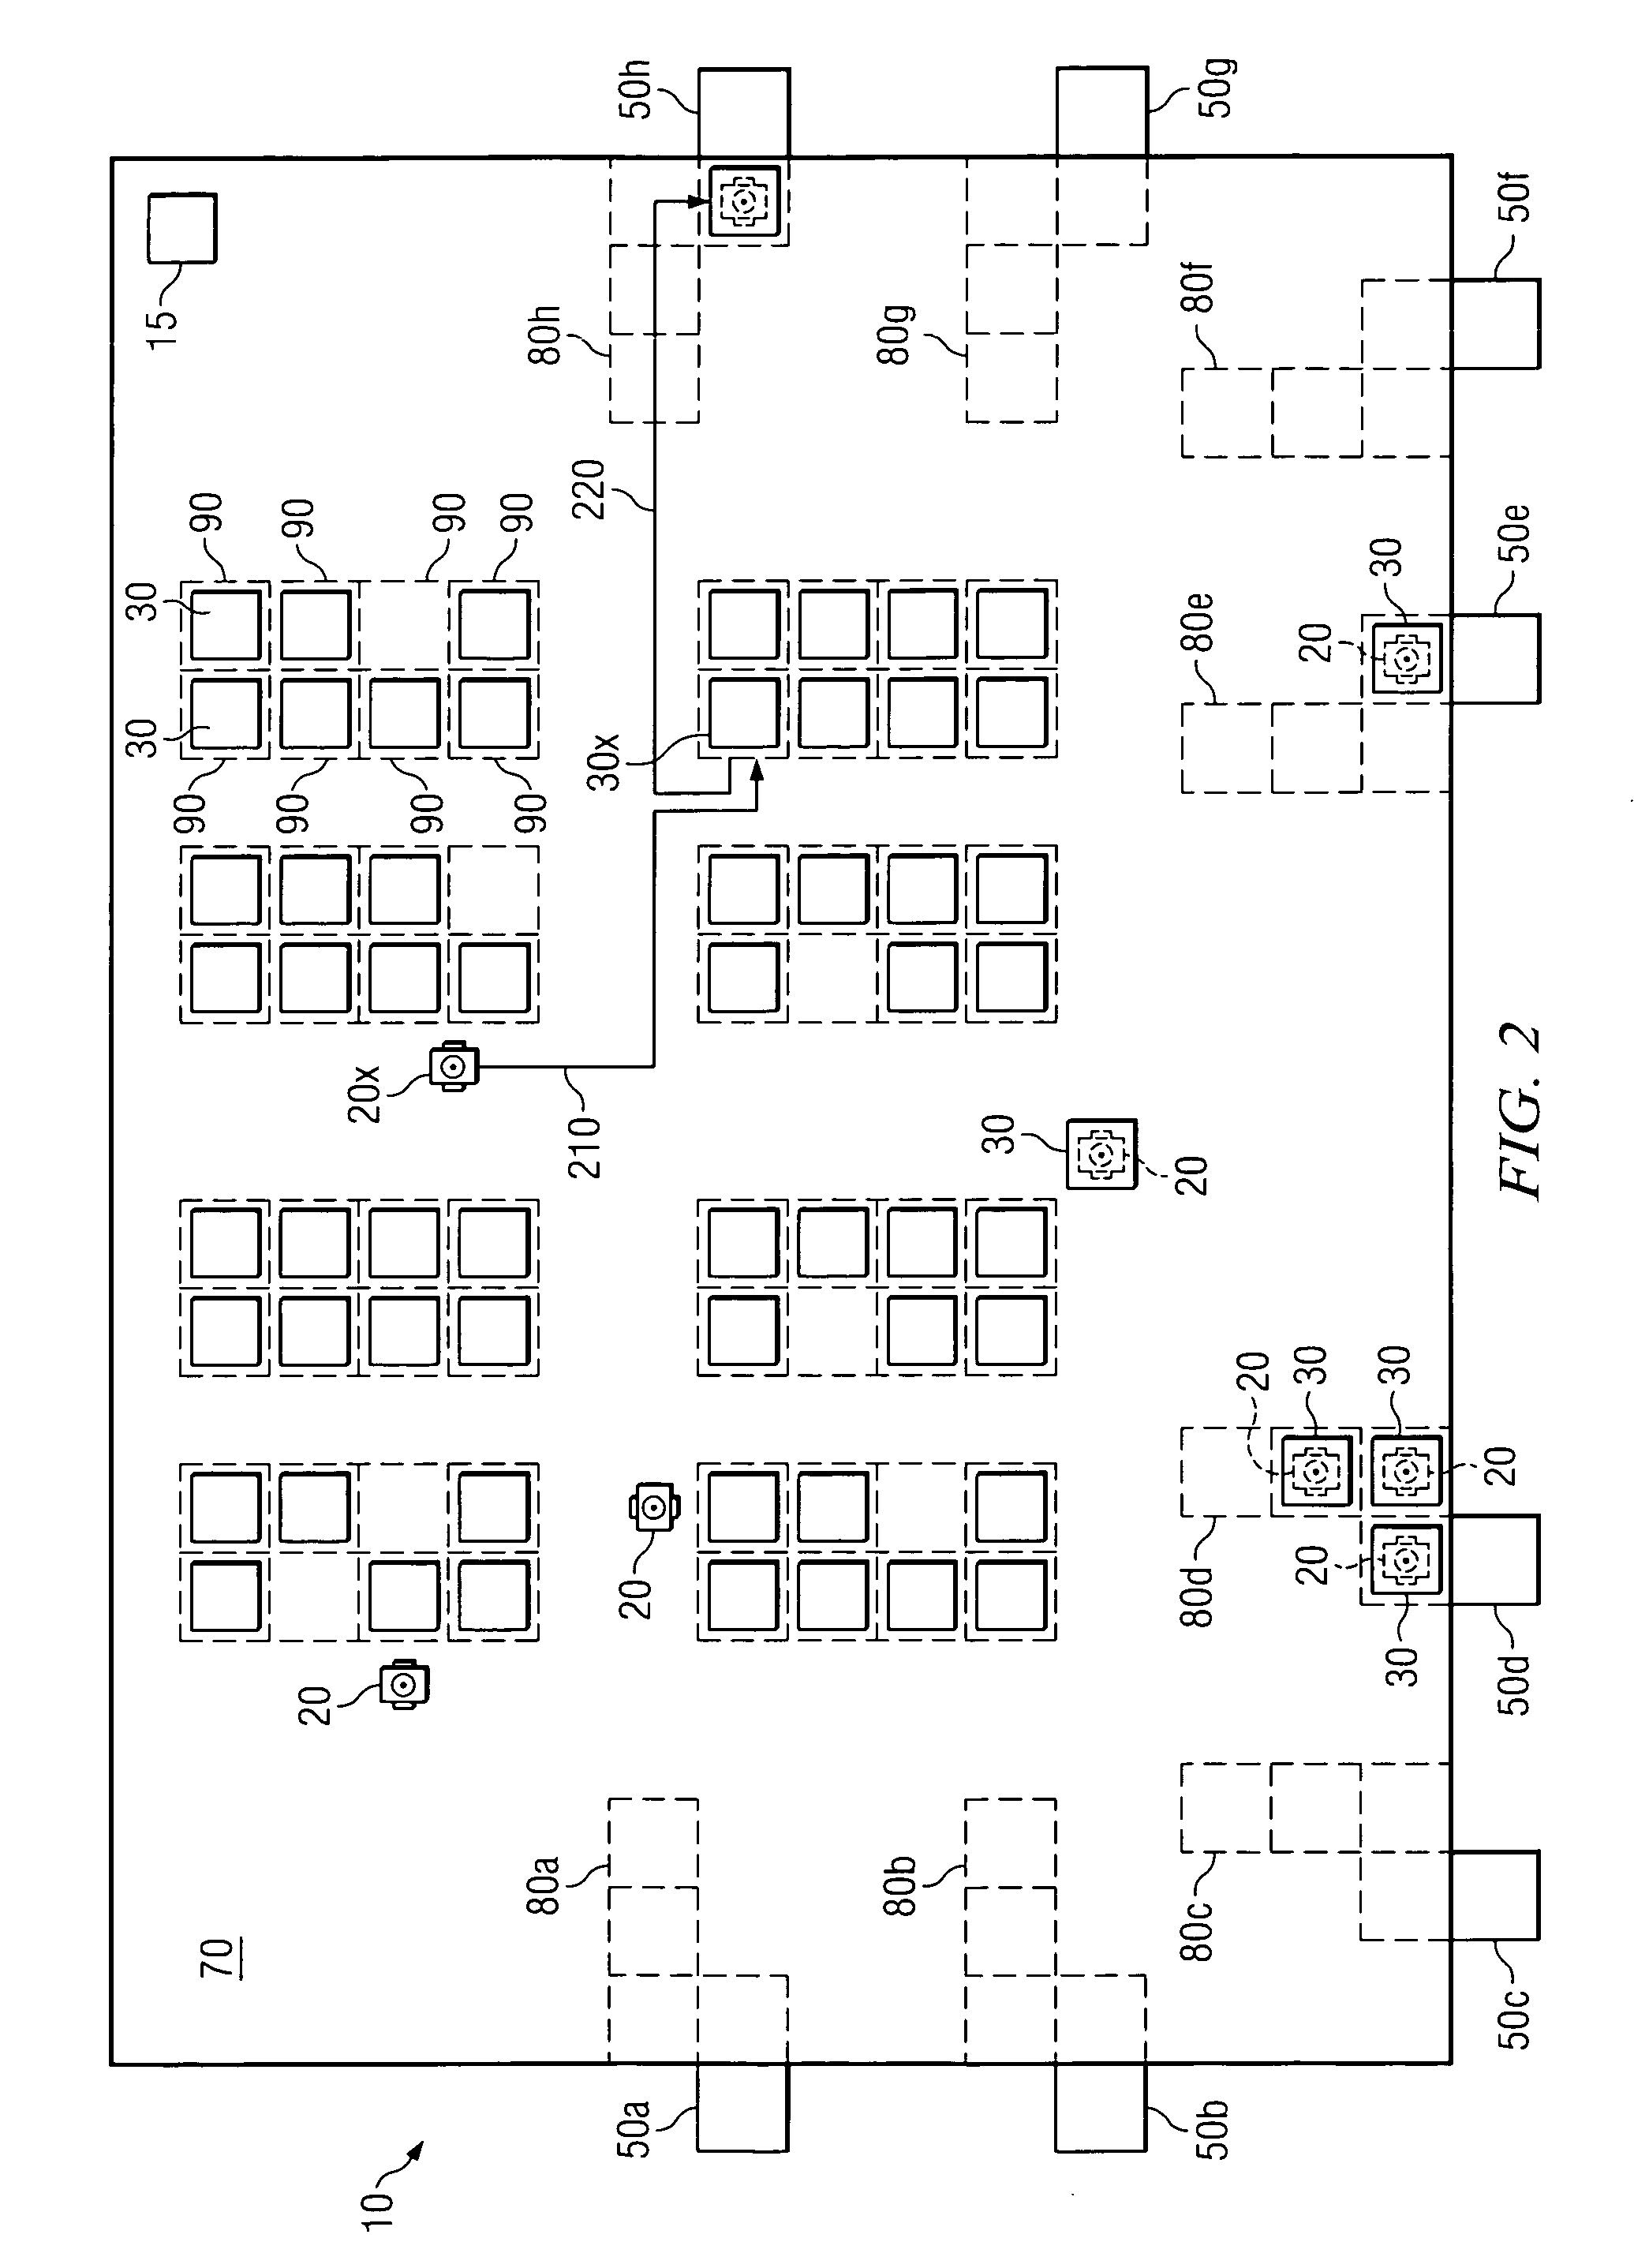 Method and system for replenishing inventory items